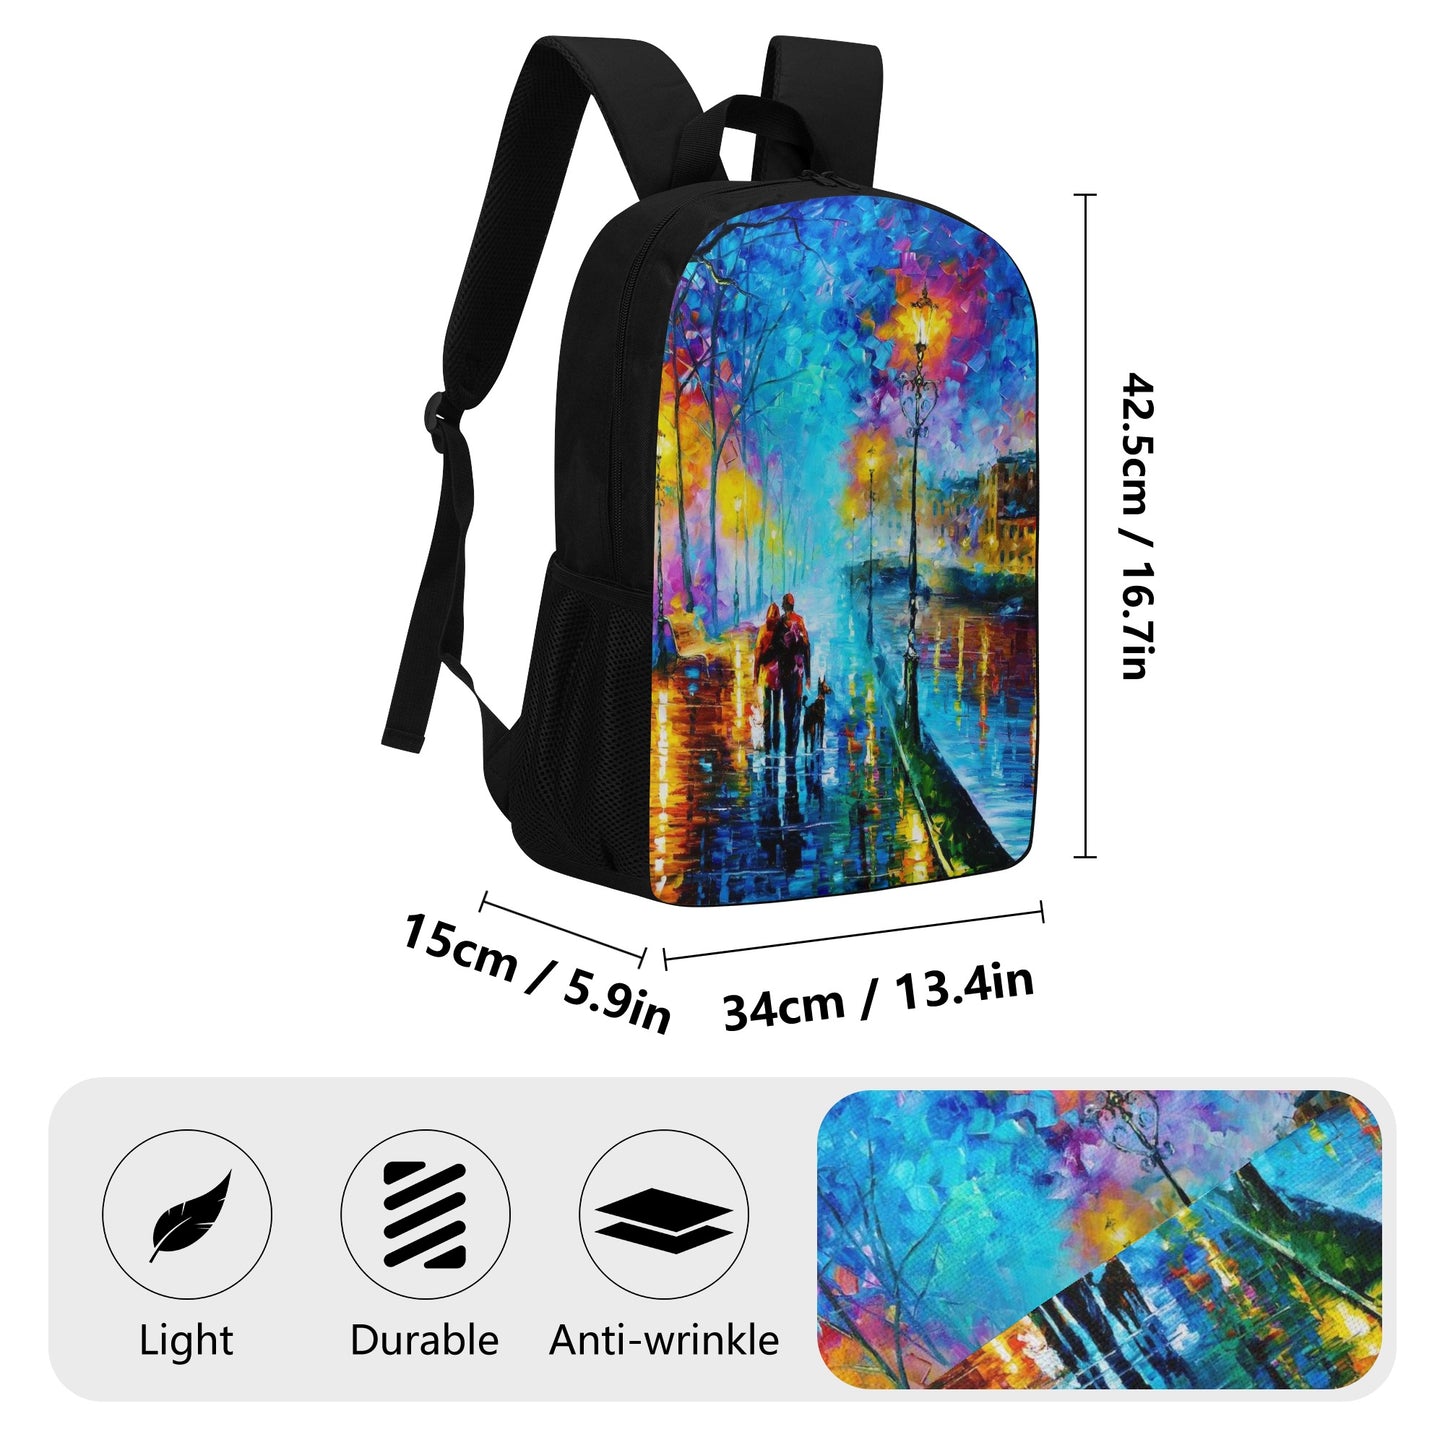 17 Inch Laptop Backpack Afremov MELODY OF THE NIGHT